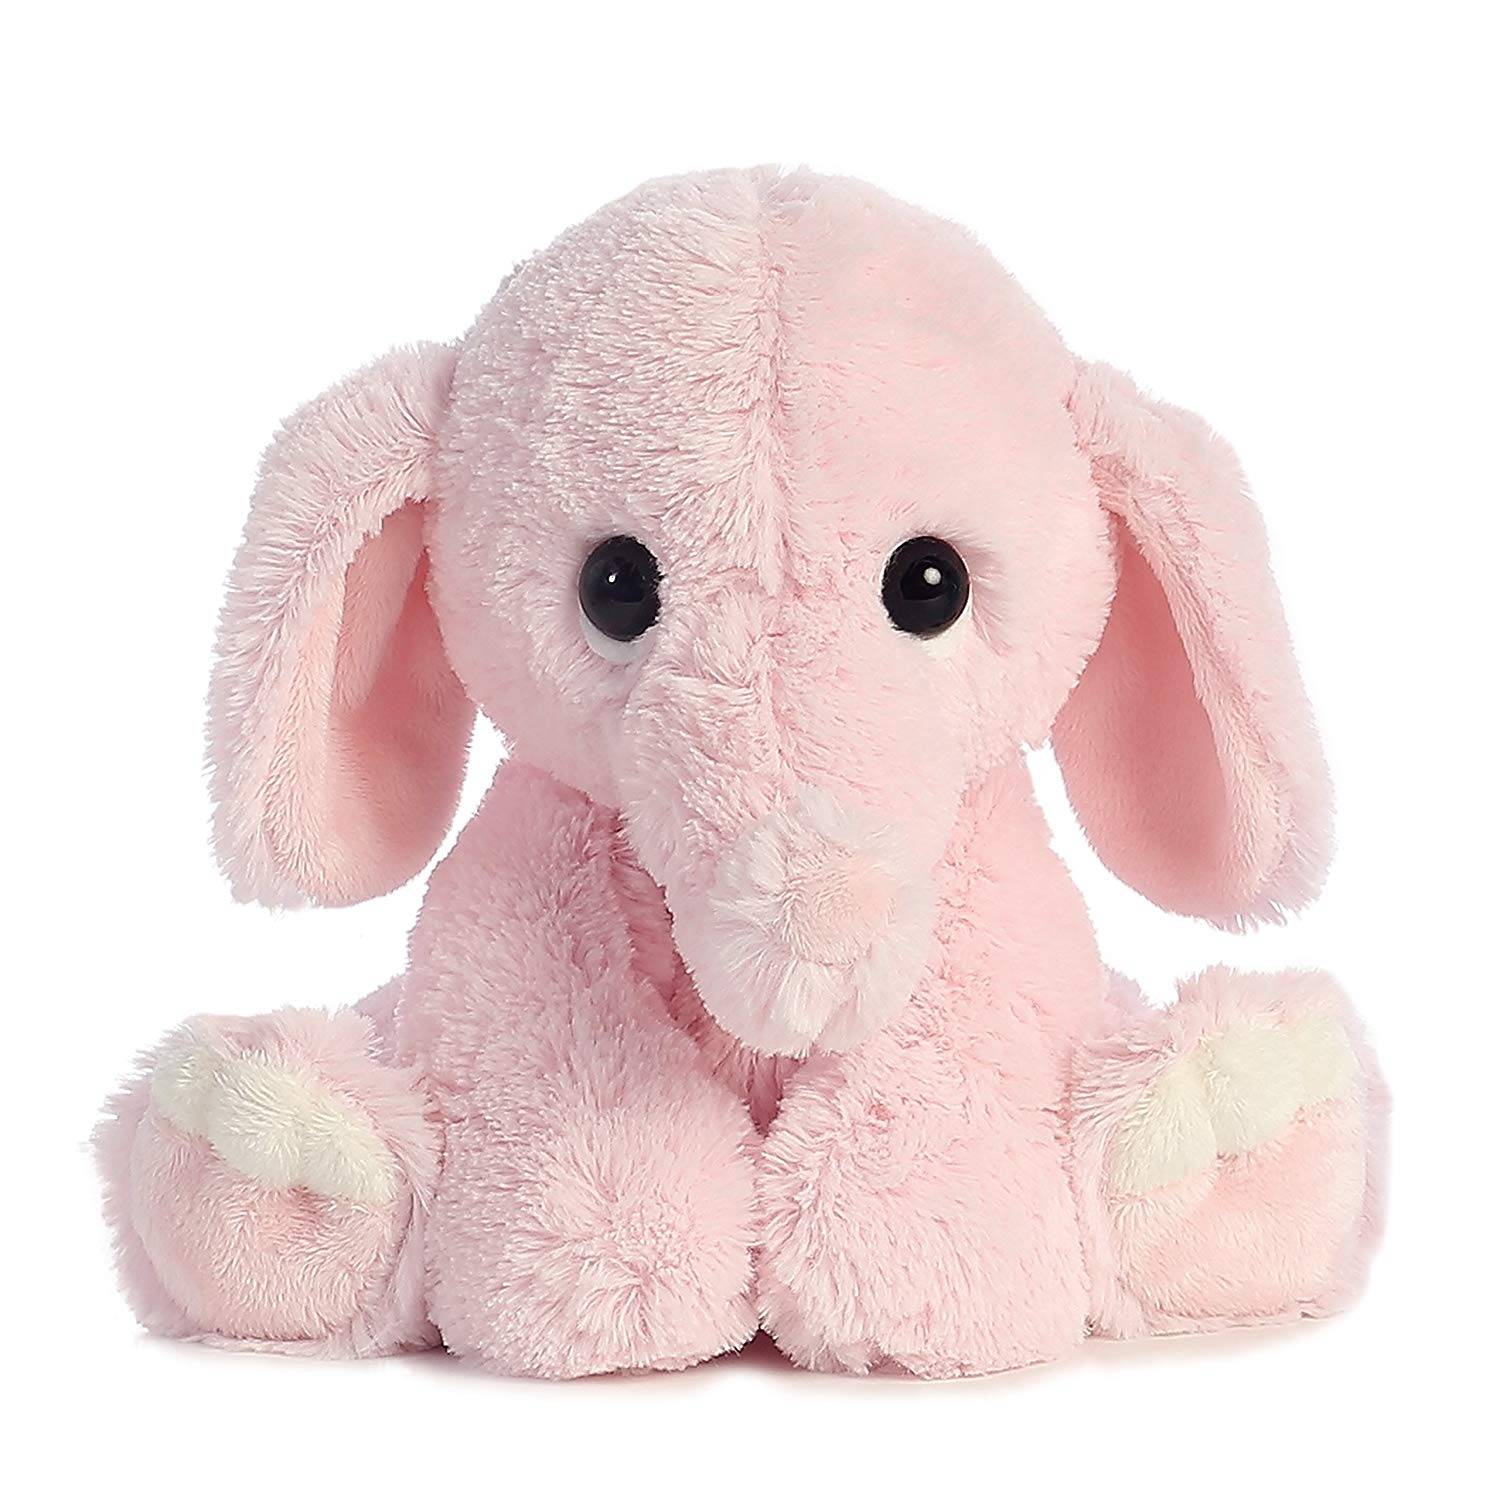 cheap low price pink grey blue color stuffed elephant plush toys soft toy for kids